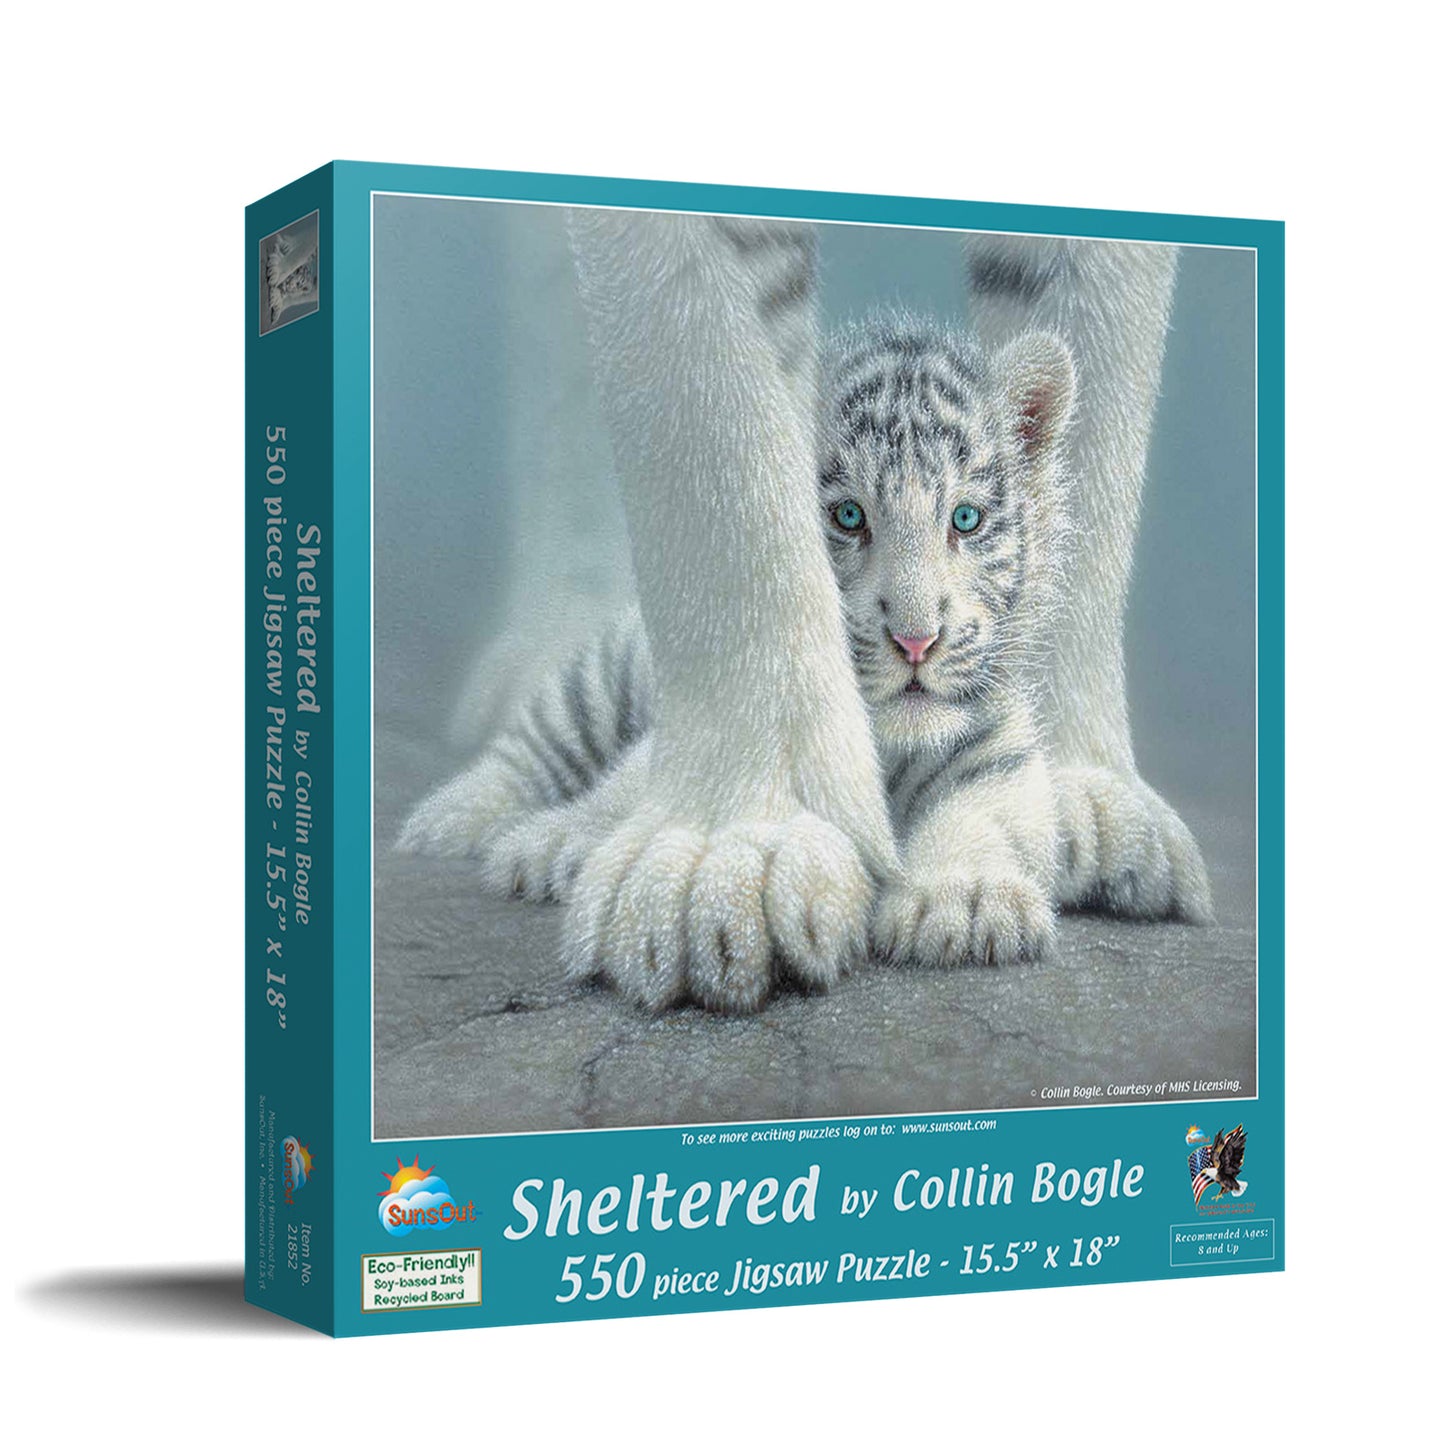 Sheltered(16) - 550 Piece Jigsaw Puzzle